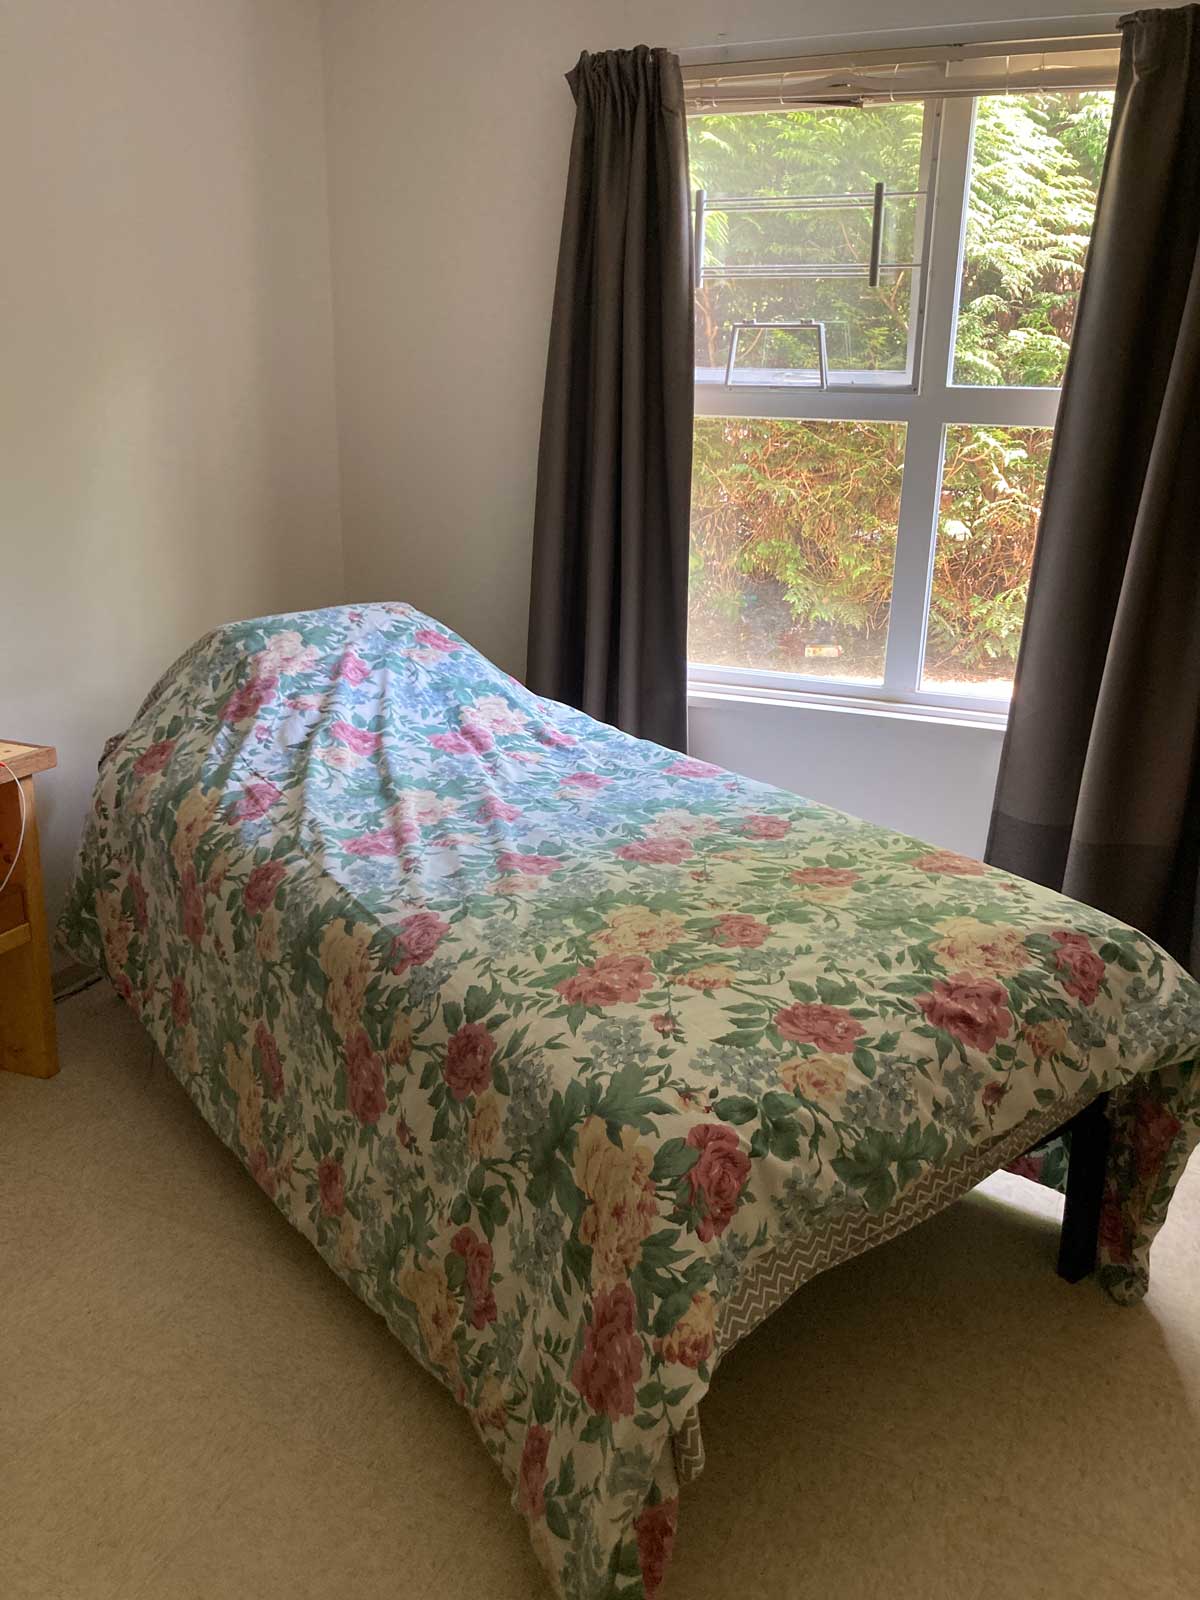 twin bed and pillow covered with floral duvet are dramatically angled into the corner of a small bedroom in senior housing. Open dark brown curtains reveal gold autumn leaves through the window.